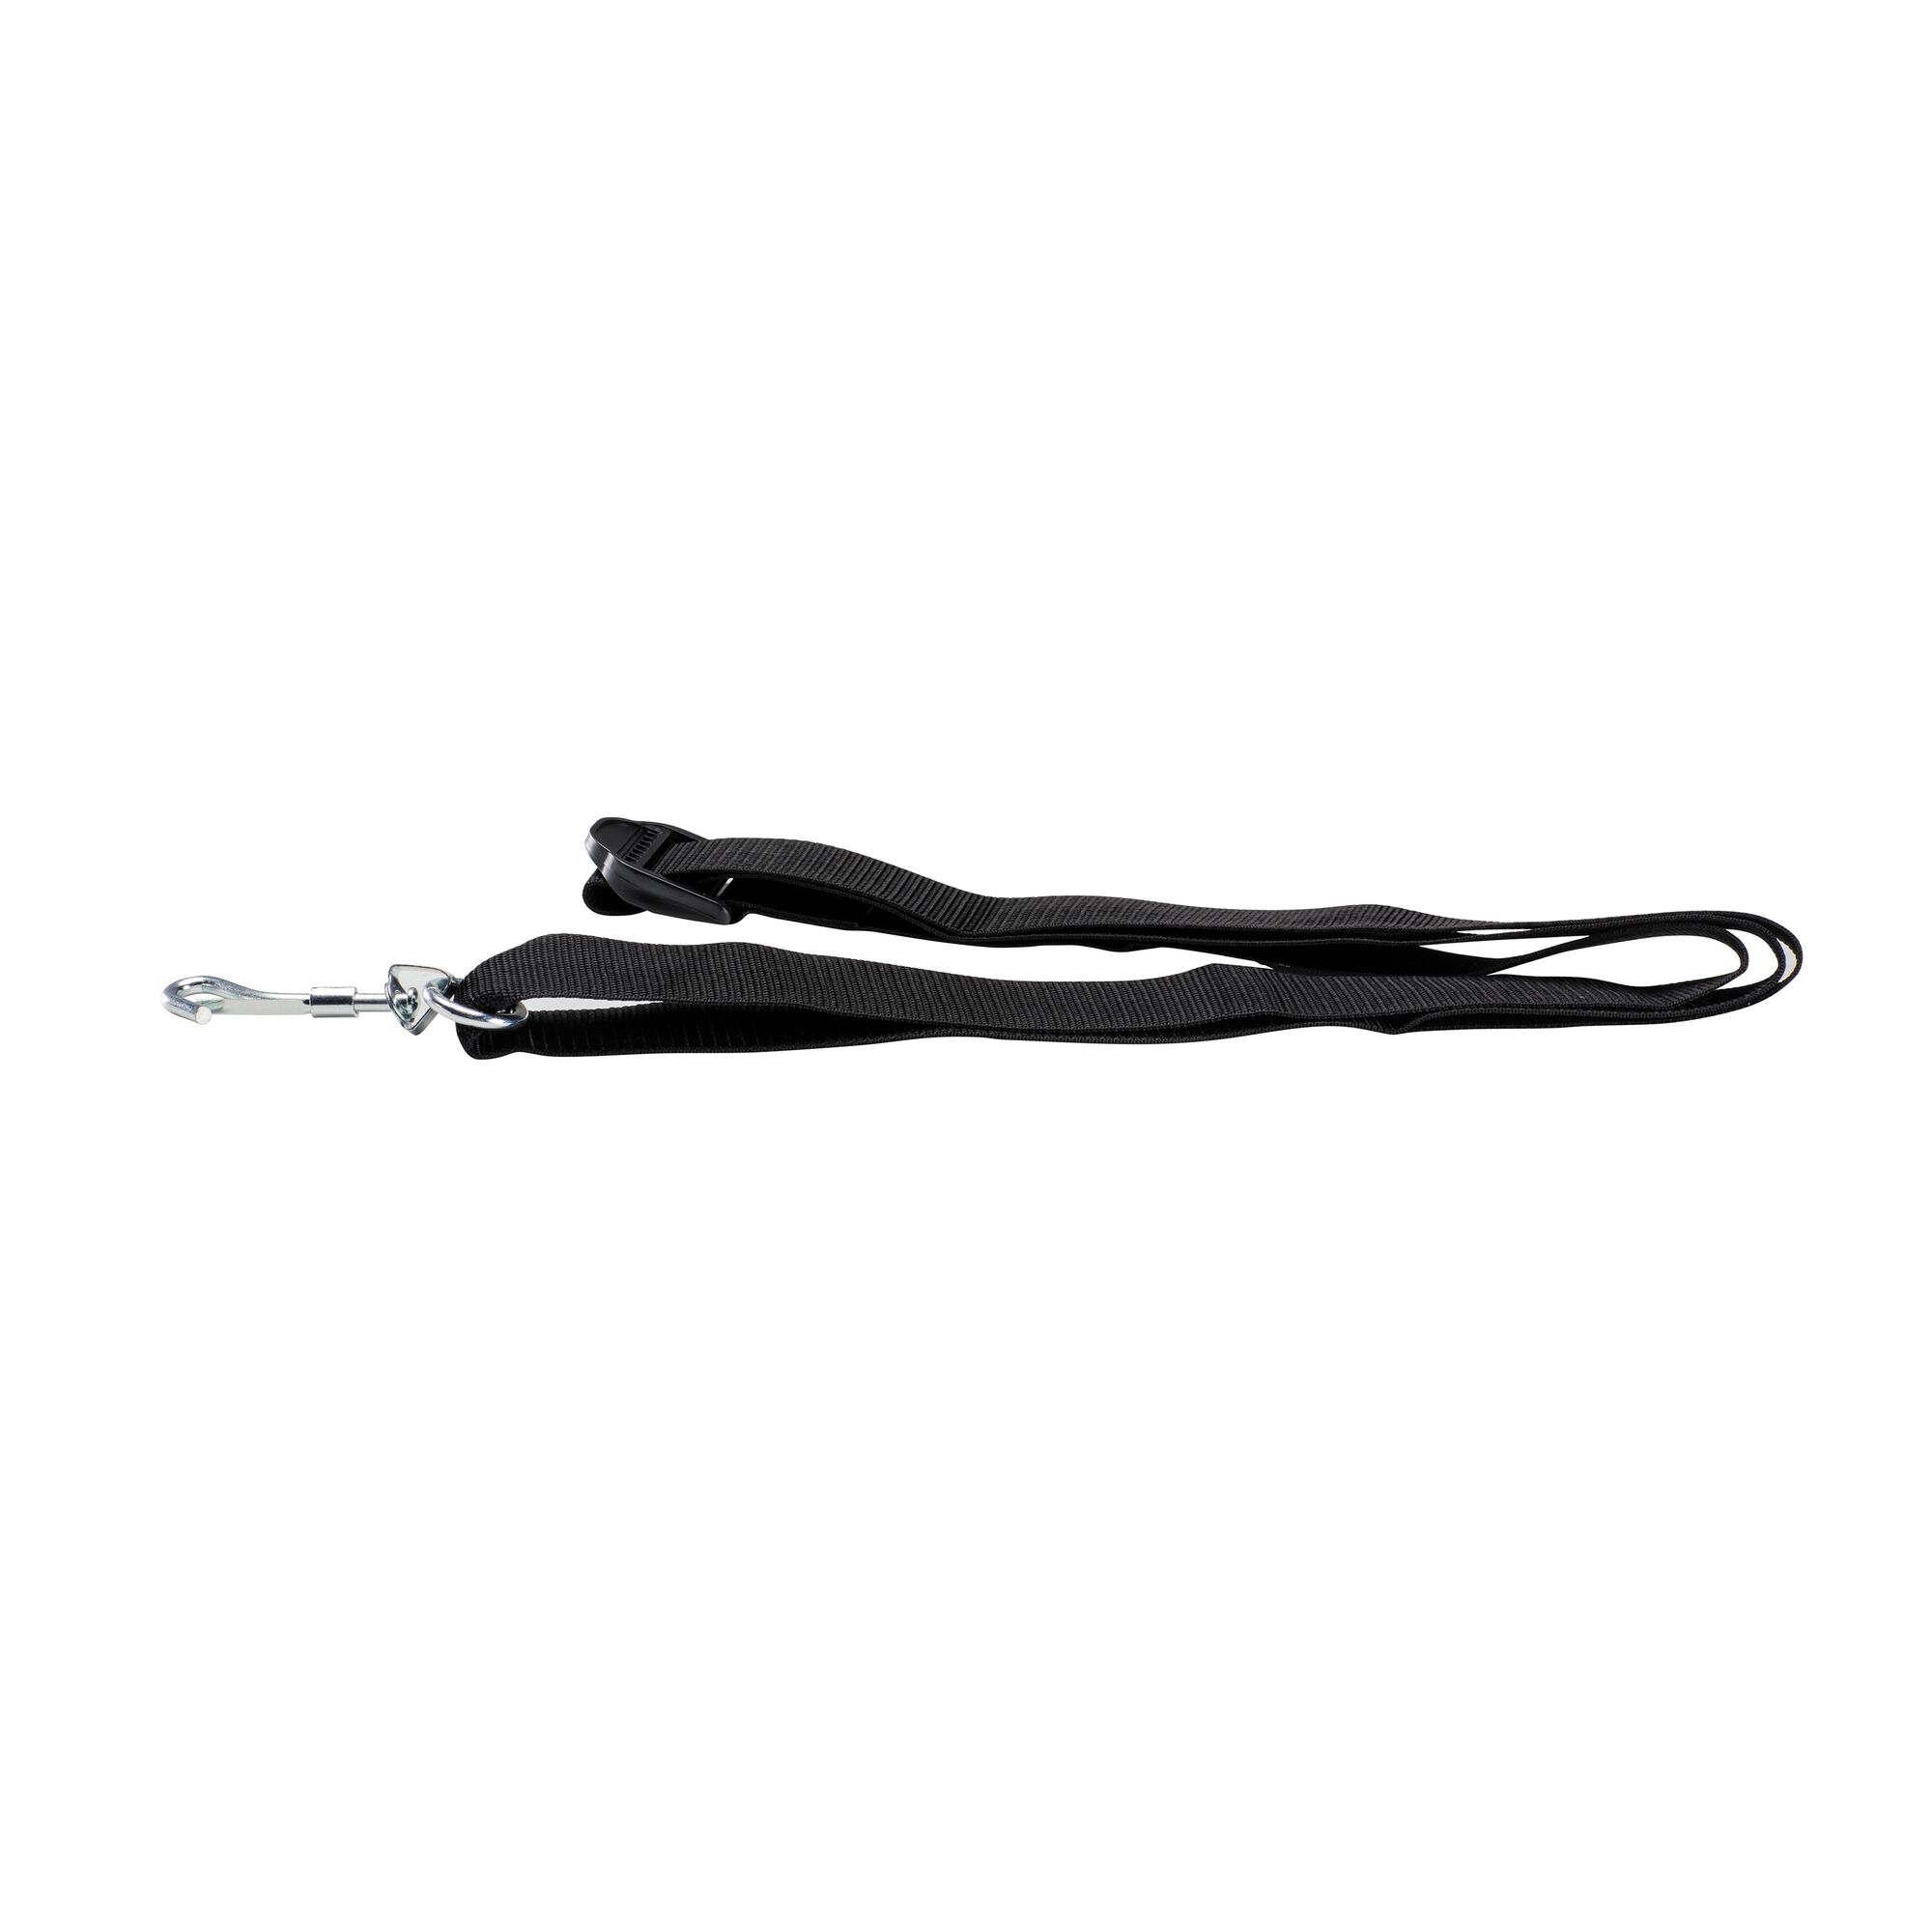 Shoulder strap feature of Weedwacker 30 C C 4 cycle 17 inch attachment capable straight shaft gas trimmer.